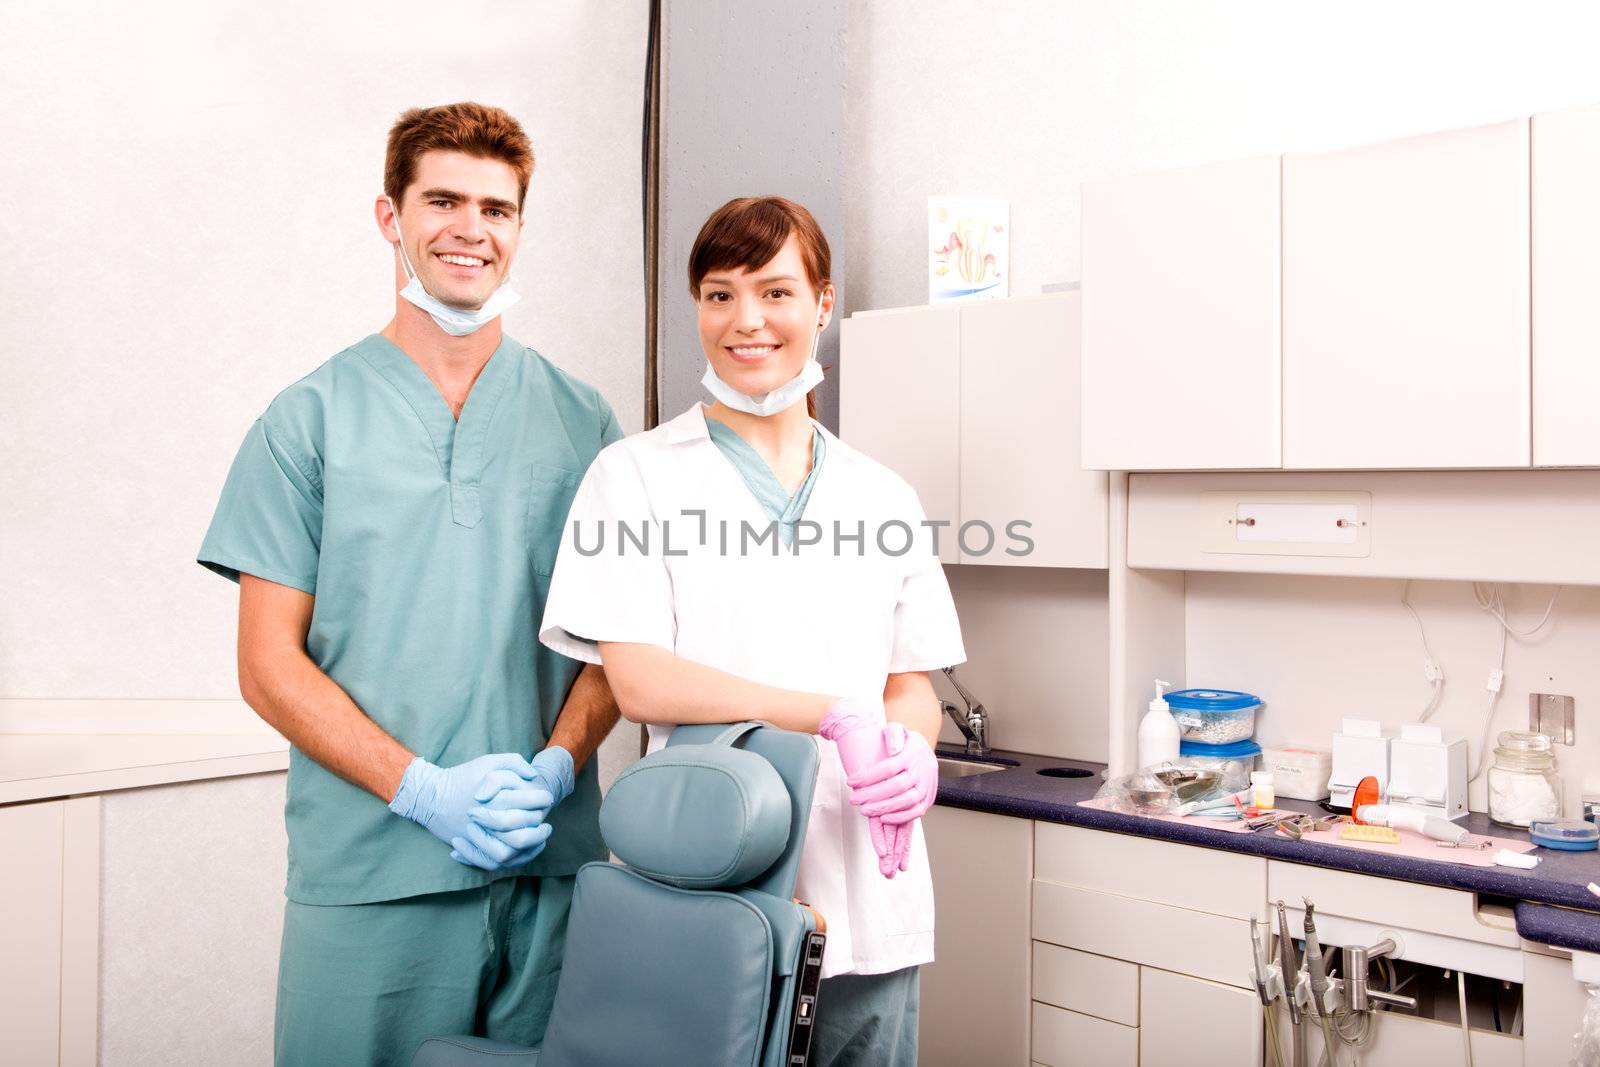 A portrait of a dentist and an assistant